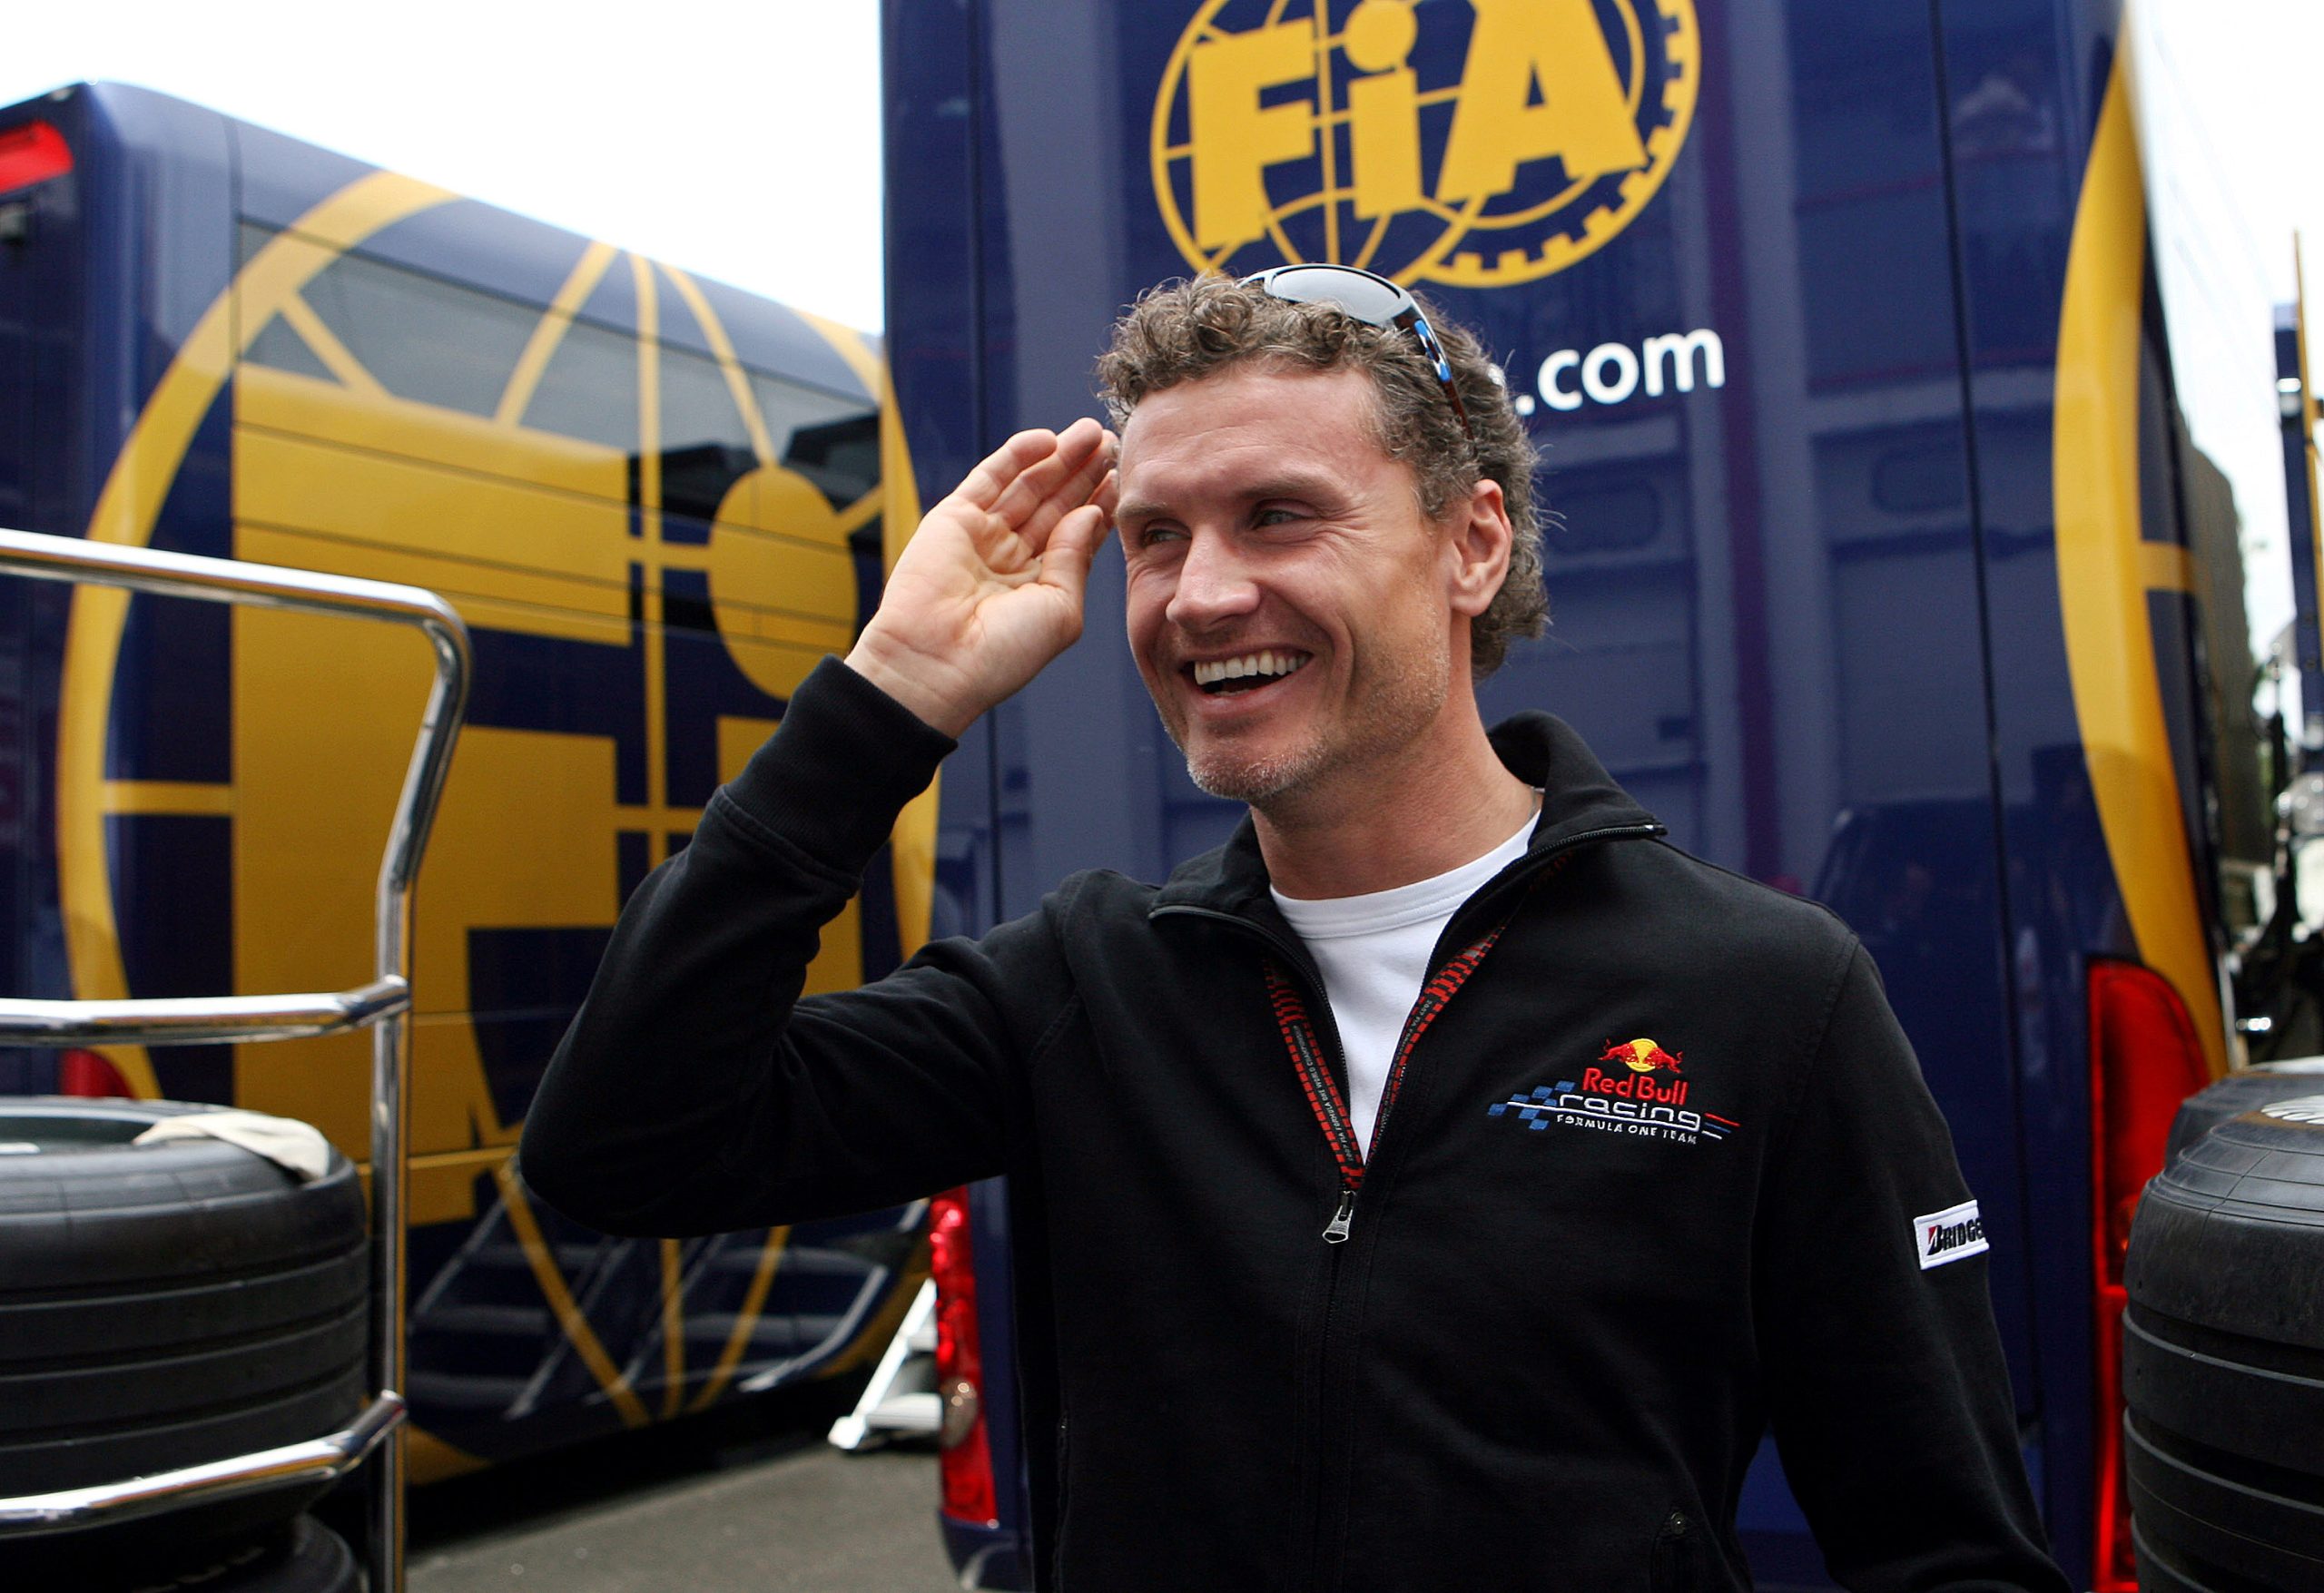 Jul 1, 2007; Magny-Cours, FRANCE; Formula One driver David Coulthard (GBR) during the 2007 Grand Prix of France at Magny-Cours Motorway. Mandatory Credit: GEPA pictures/ Franz Pammer via USA TODAY Sports